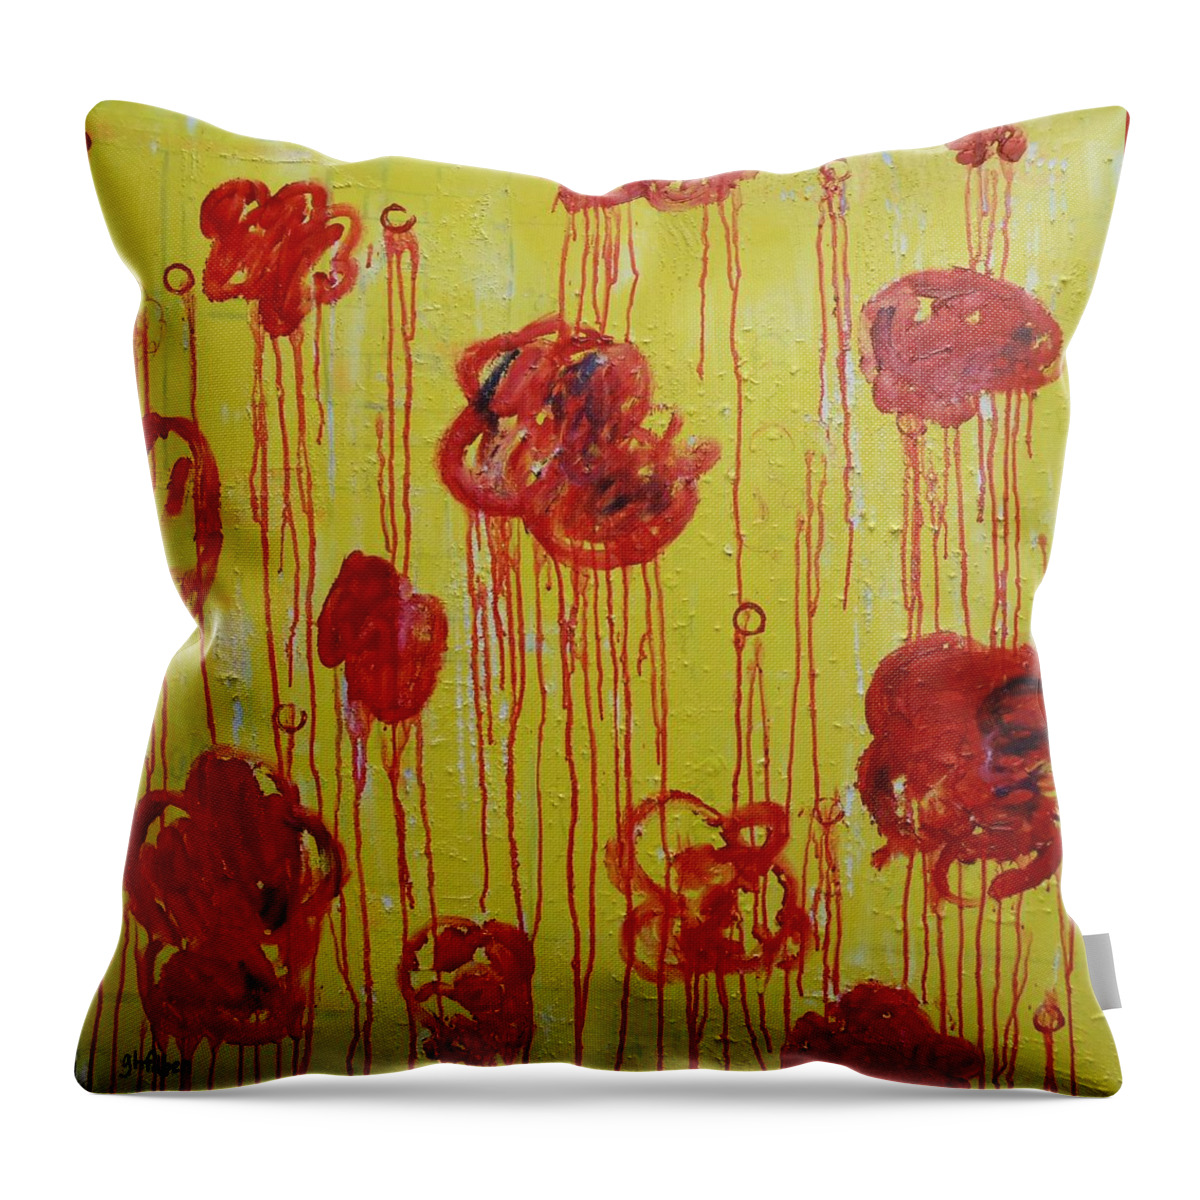 Abstract Throw Pillow featuring the painting Shaw Park Flower Garden by GH FiLben